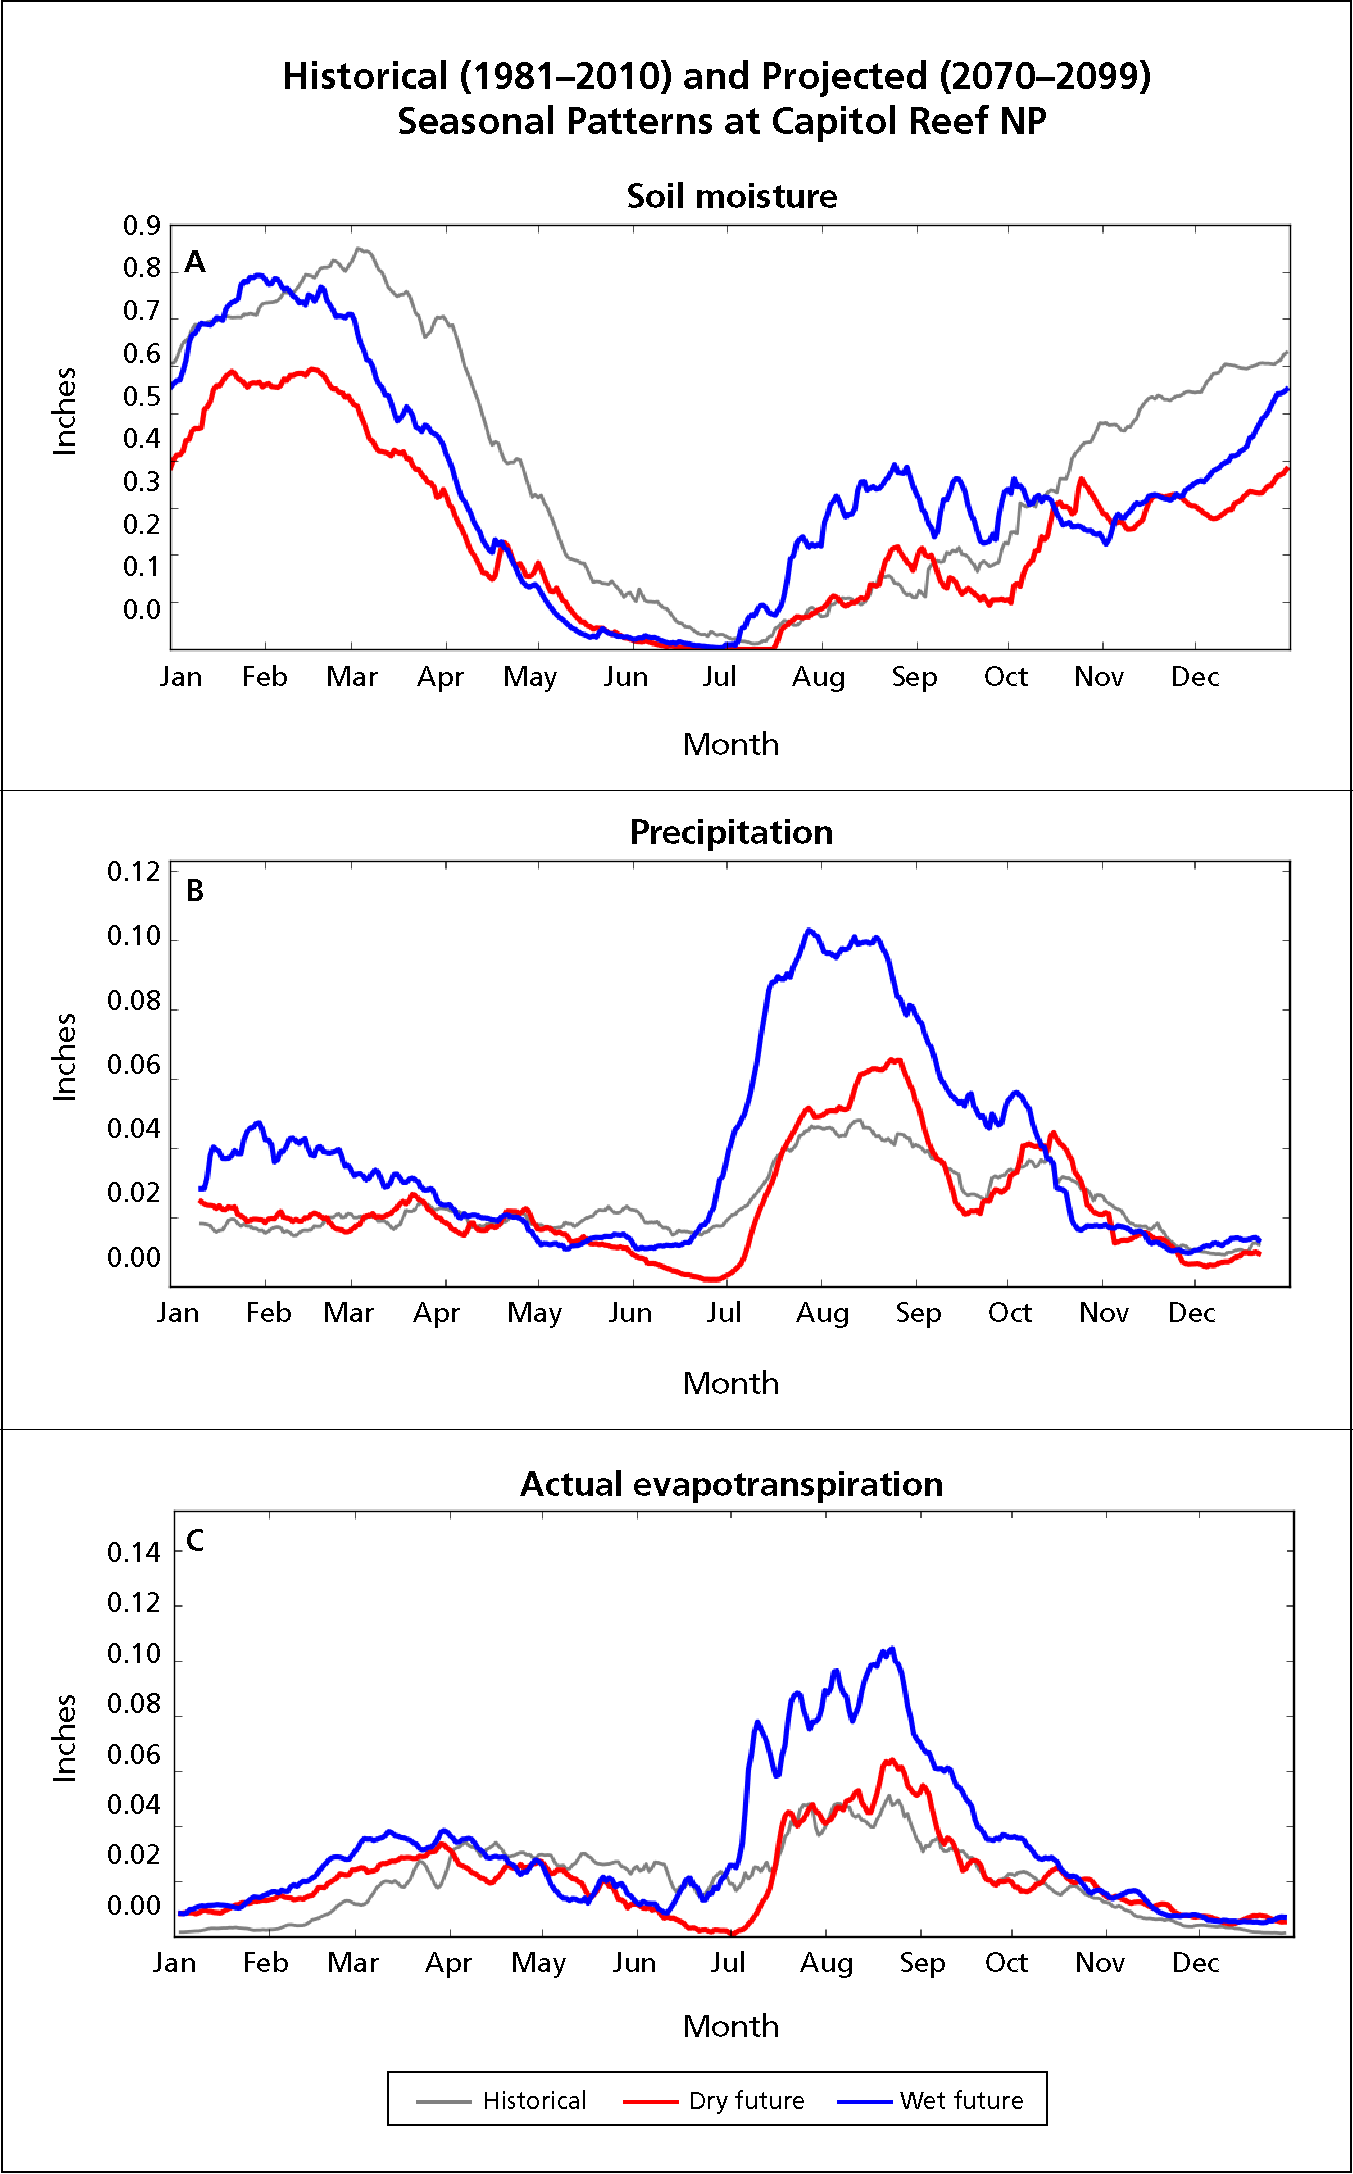 Three graphs showing inches of soil moisture (SM), precipitation (P), and actual evapotranspiration (AET) by month under historical and future scenarios at Capitol Reef NP. Historical SM ranges from ~0 inches in July to >0.8 inches in March. Under wet and dry future scenarios, SM is lower than historical levels from October to December and March to July. Under the wet scenario, SM is higher than historical levels from July to October. Historical P ranges from ~0.02 inches in winter to >0.04 inches in August. Under the wet future scenario, P exceeds historical levels from July to October and January to April. Historical AET ranges from ~0 inches in Dec/Jan to <0.06 inches in August. Under the wet future scenario, AET exceeds current levels from July to October.